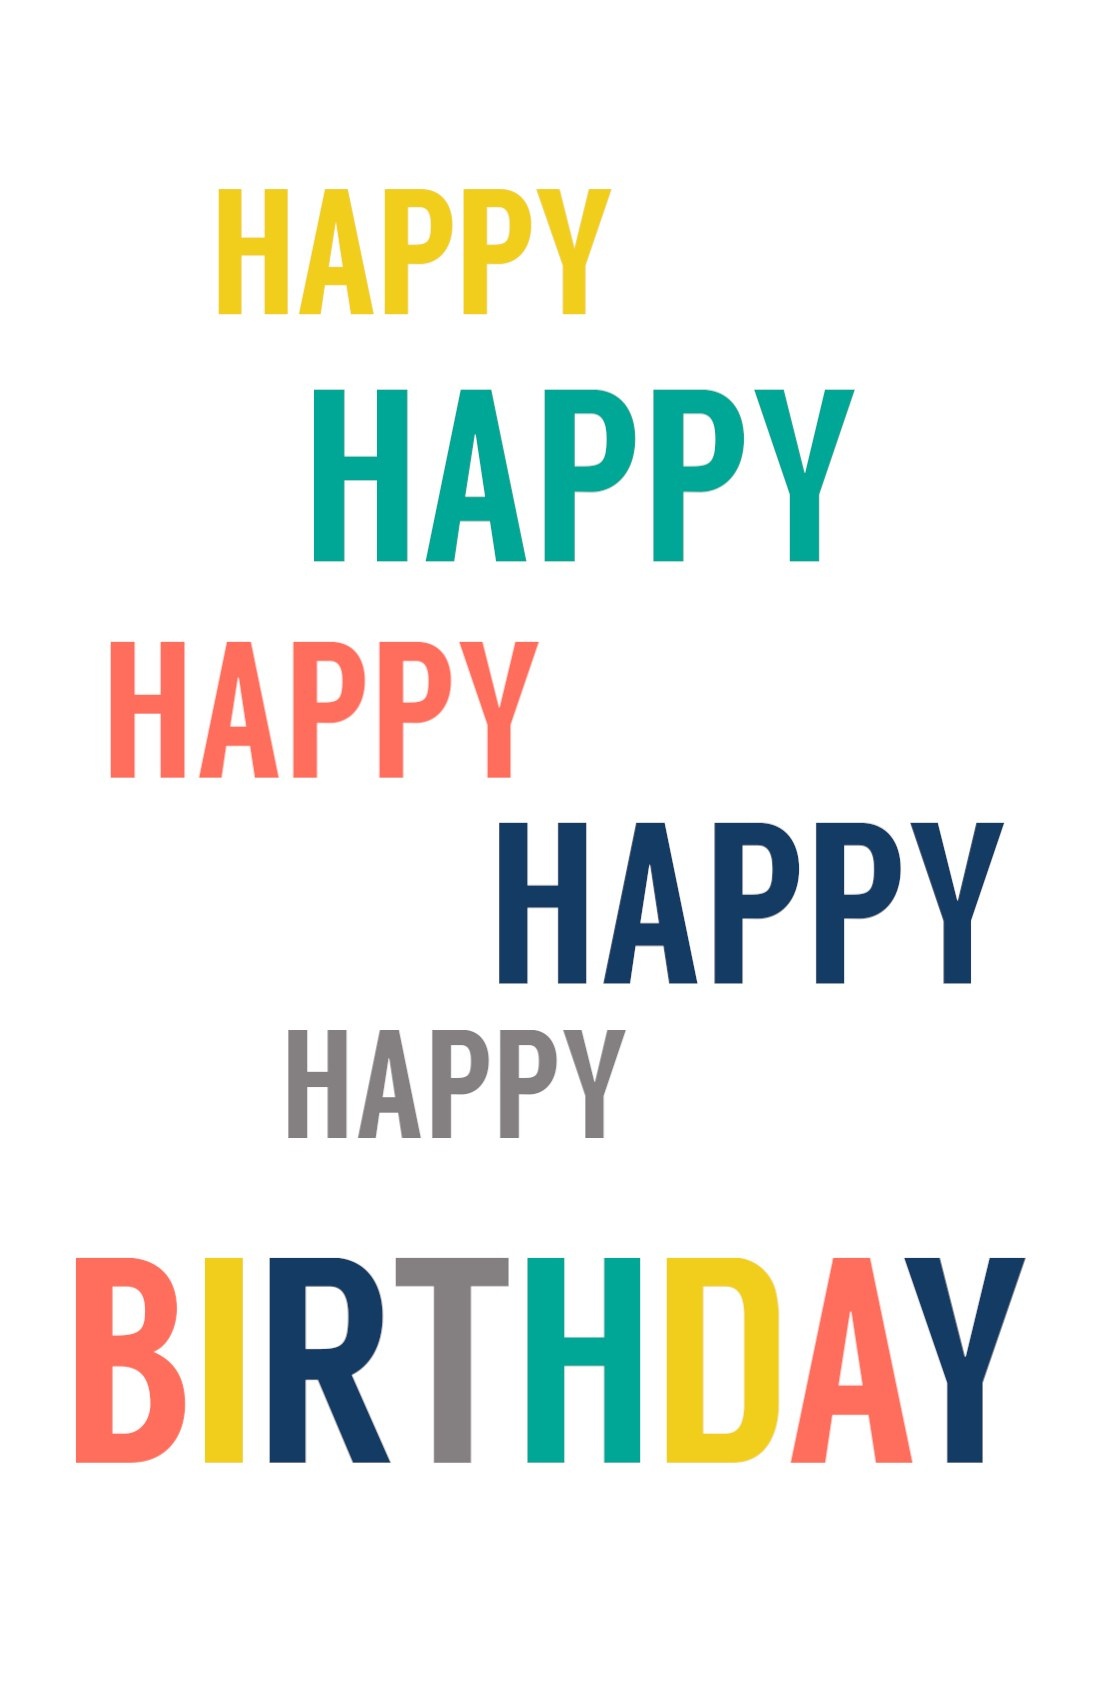 Free Printable Birthday Cards - Paper Trail Design - Free Printable Happy Birthday Cards